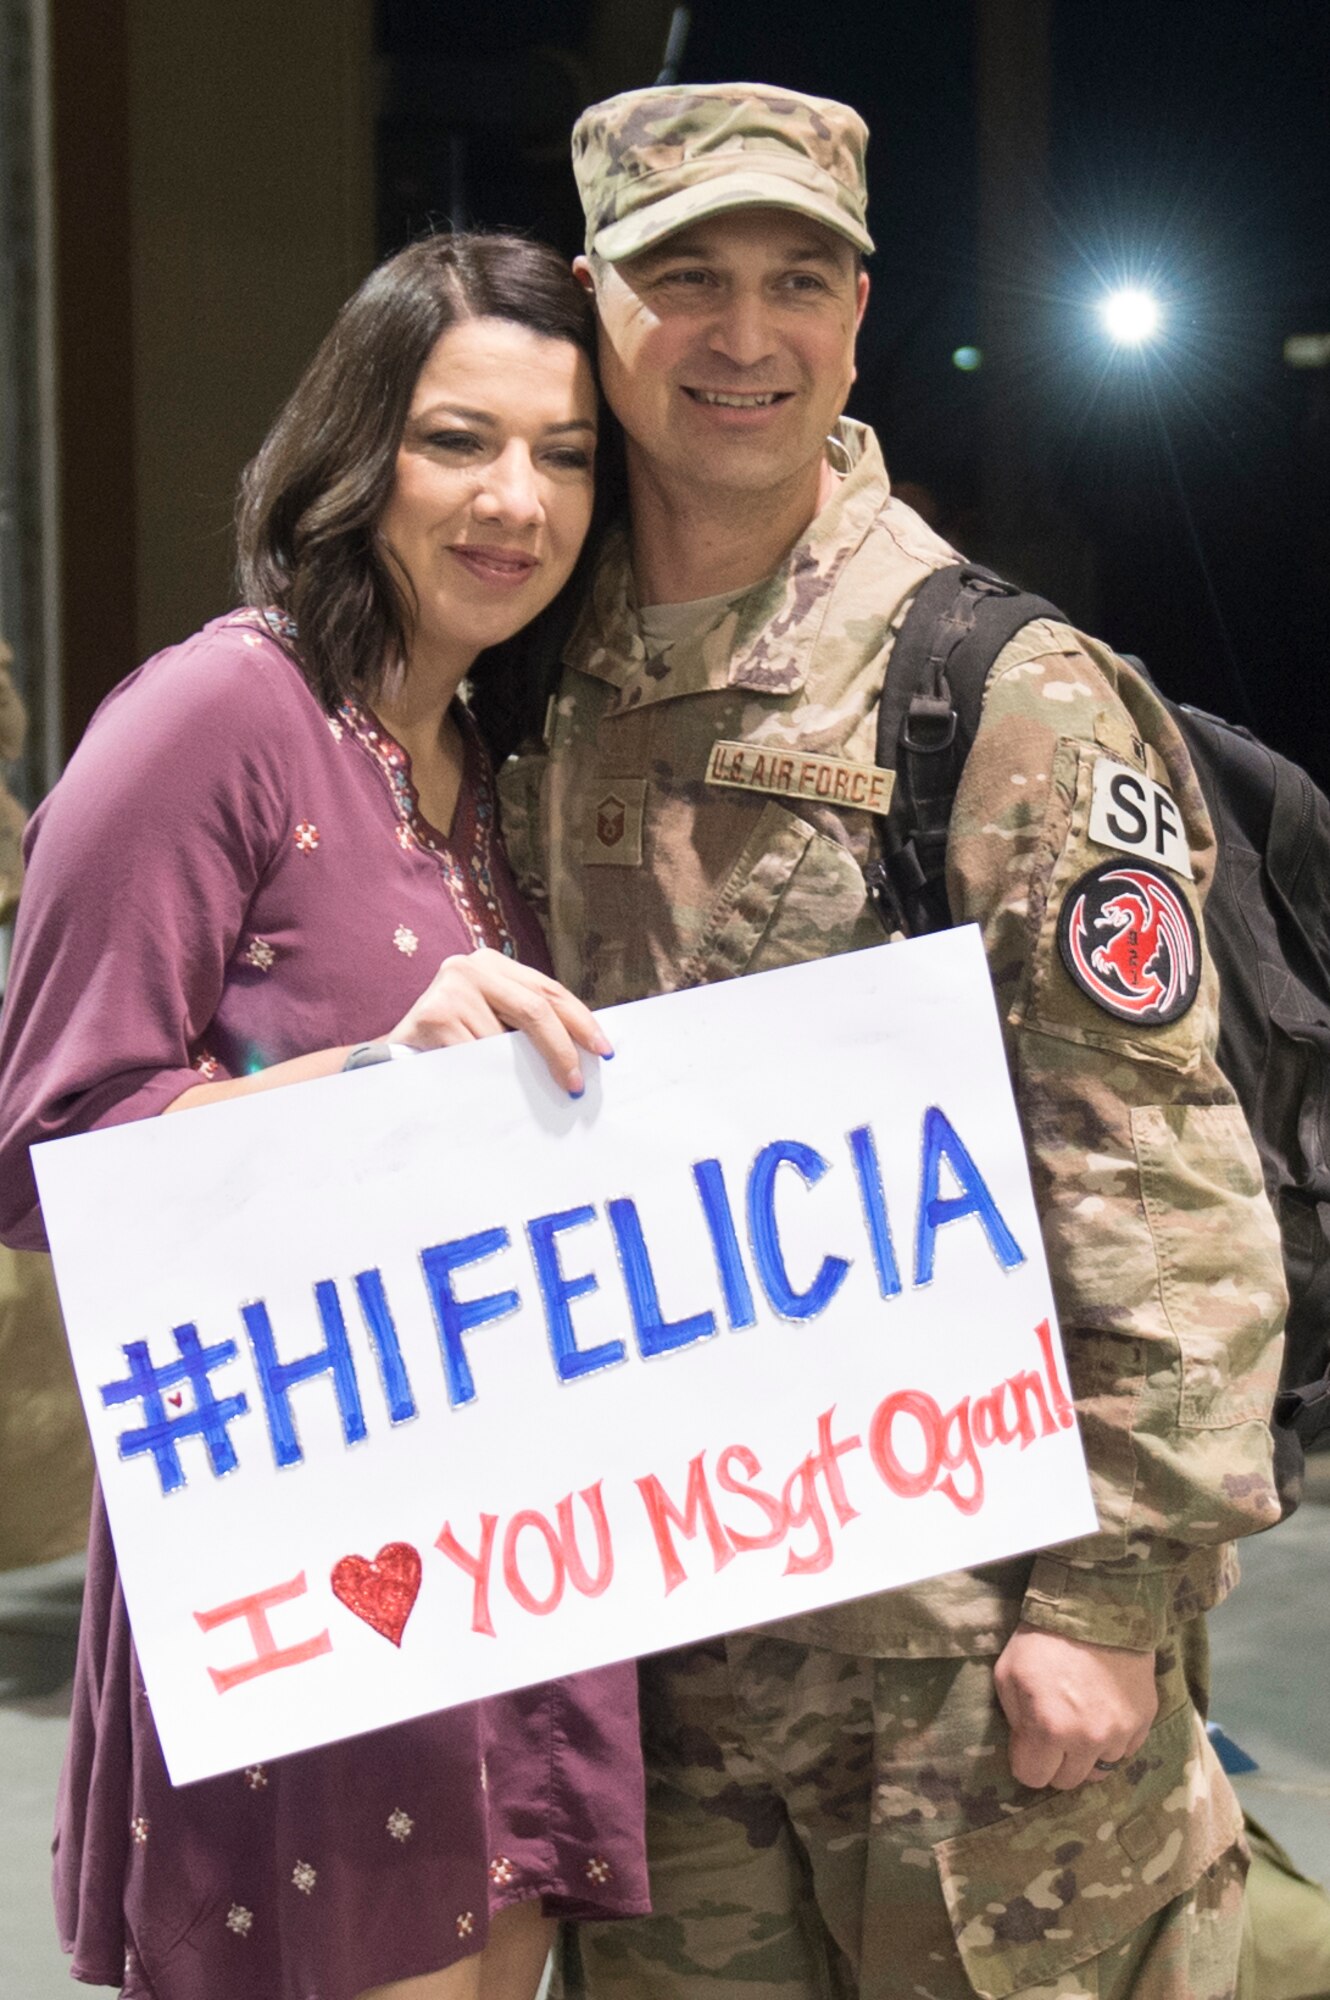 Master Sgt. Matthew Ogan, 921st Contingency Response Squadron Force Protection Flight chief, poses for a picture with his wife as he returns from a three-month deployment to Iraq, in support of Operation Inherent Resolve, Jan. 14, 2017, at Travis Air Force Base, California.  The CRW played a crucial role in re-opening Qayyarah West Airfield and moving more than 1,423 short tons of cargo in and out of the region. (U.S. Air Force Photo by Tech. Sgt. Liliana Moreno)